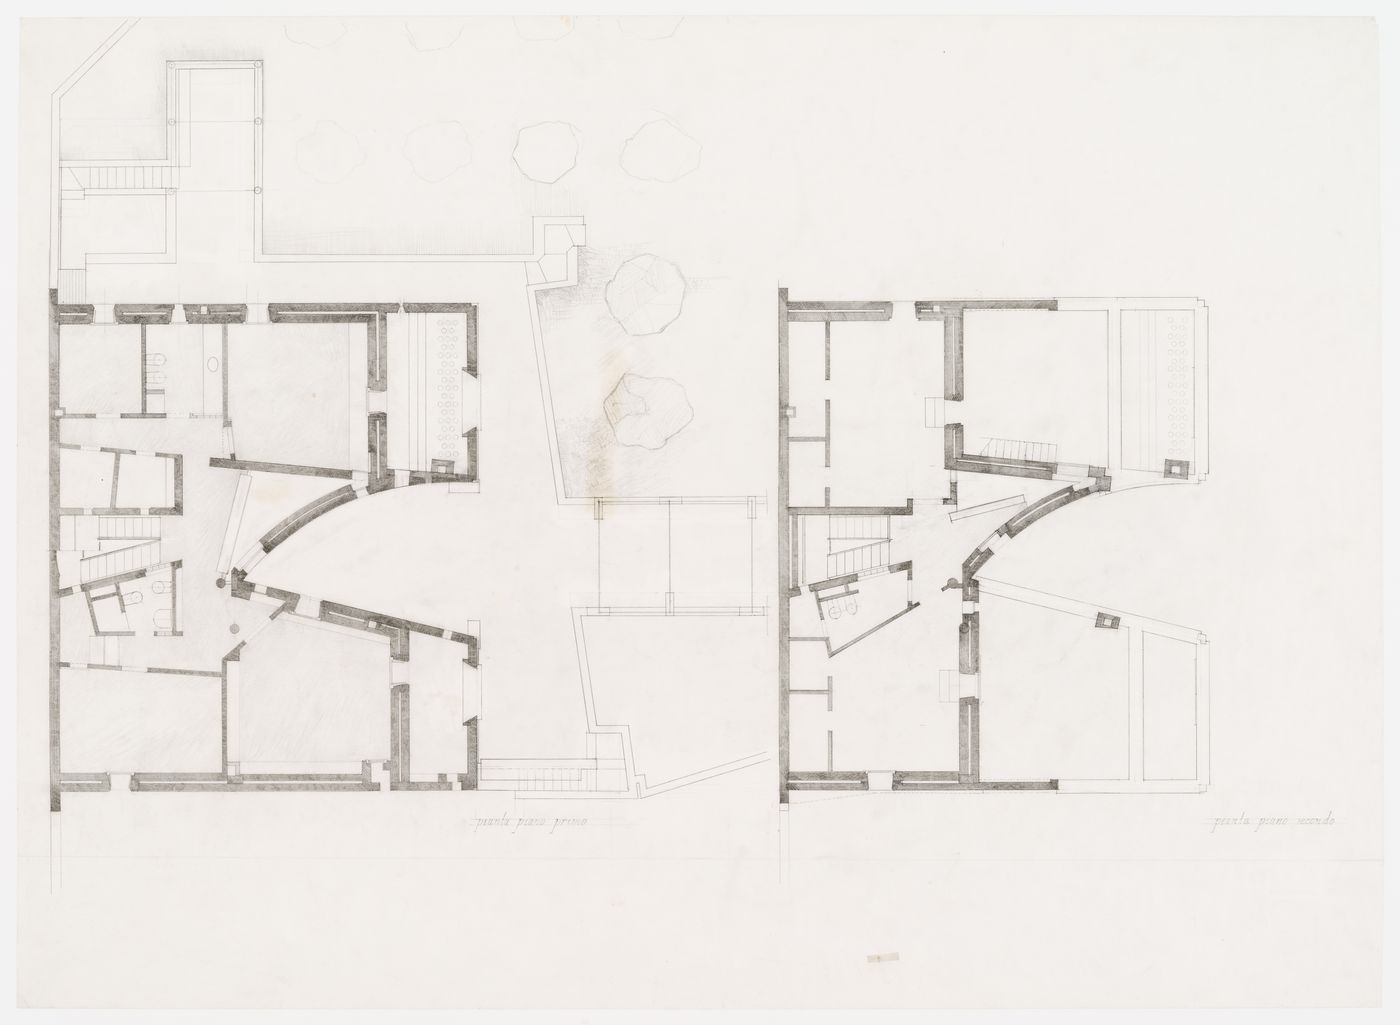 Plans of first and second floors for Casa Miggiano, Otranto, Italy